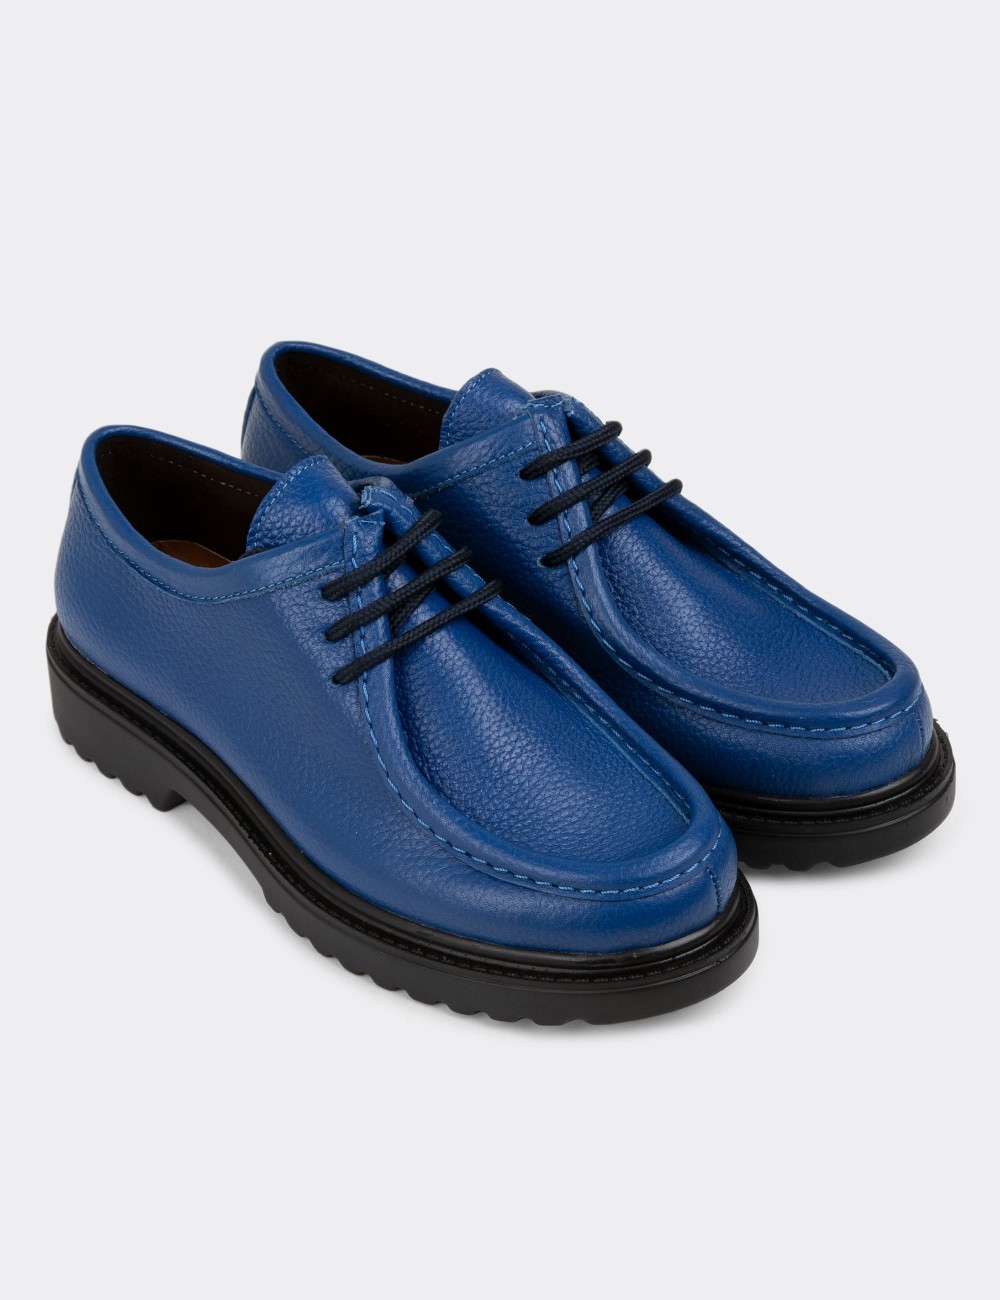 Blue Leather Lace-up Shoes - 01935ZMVIC01